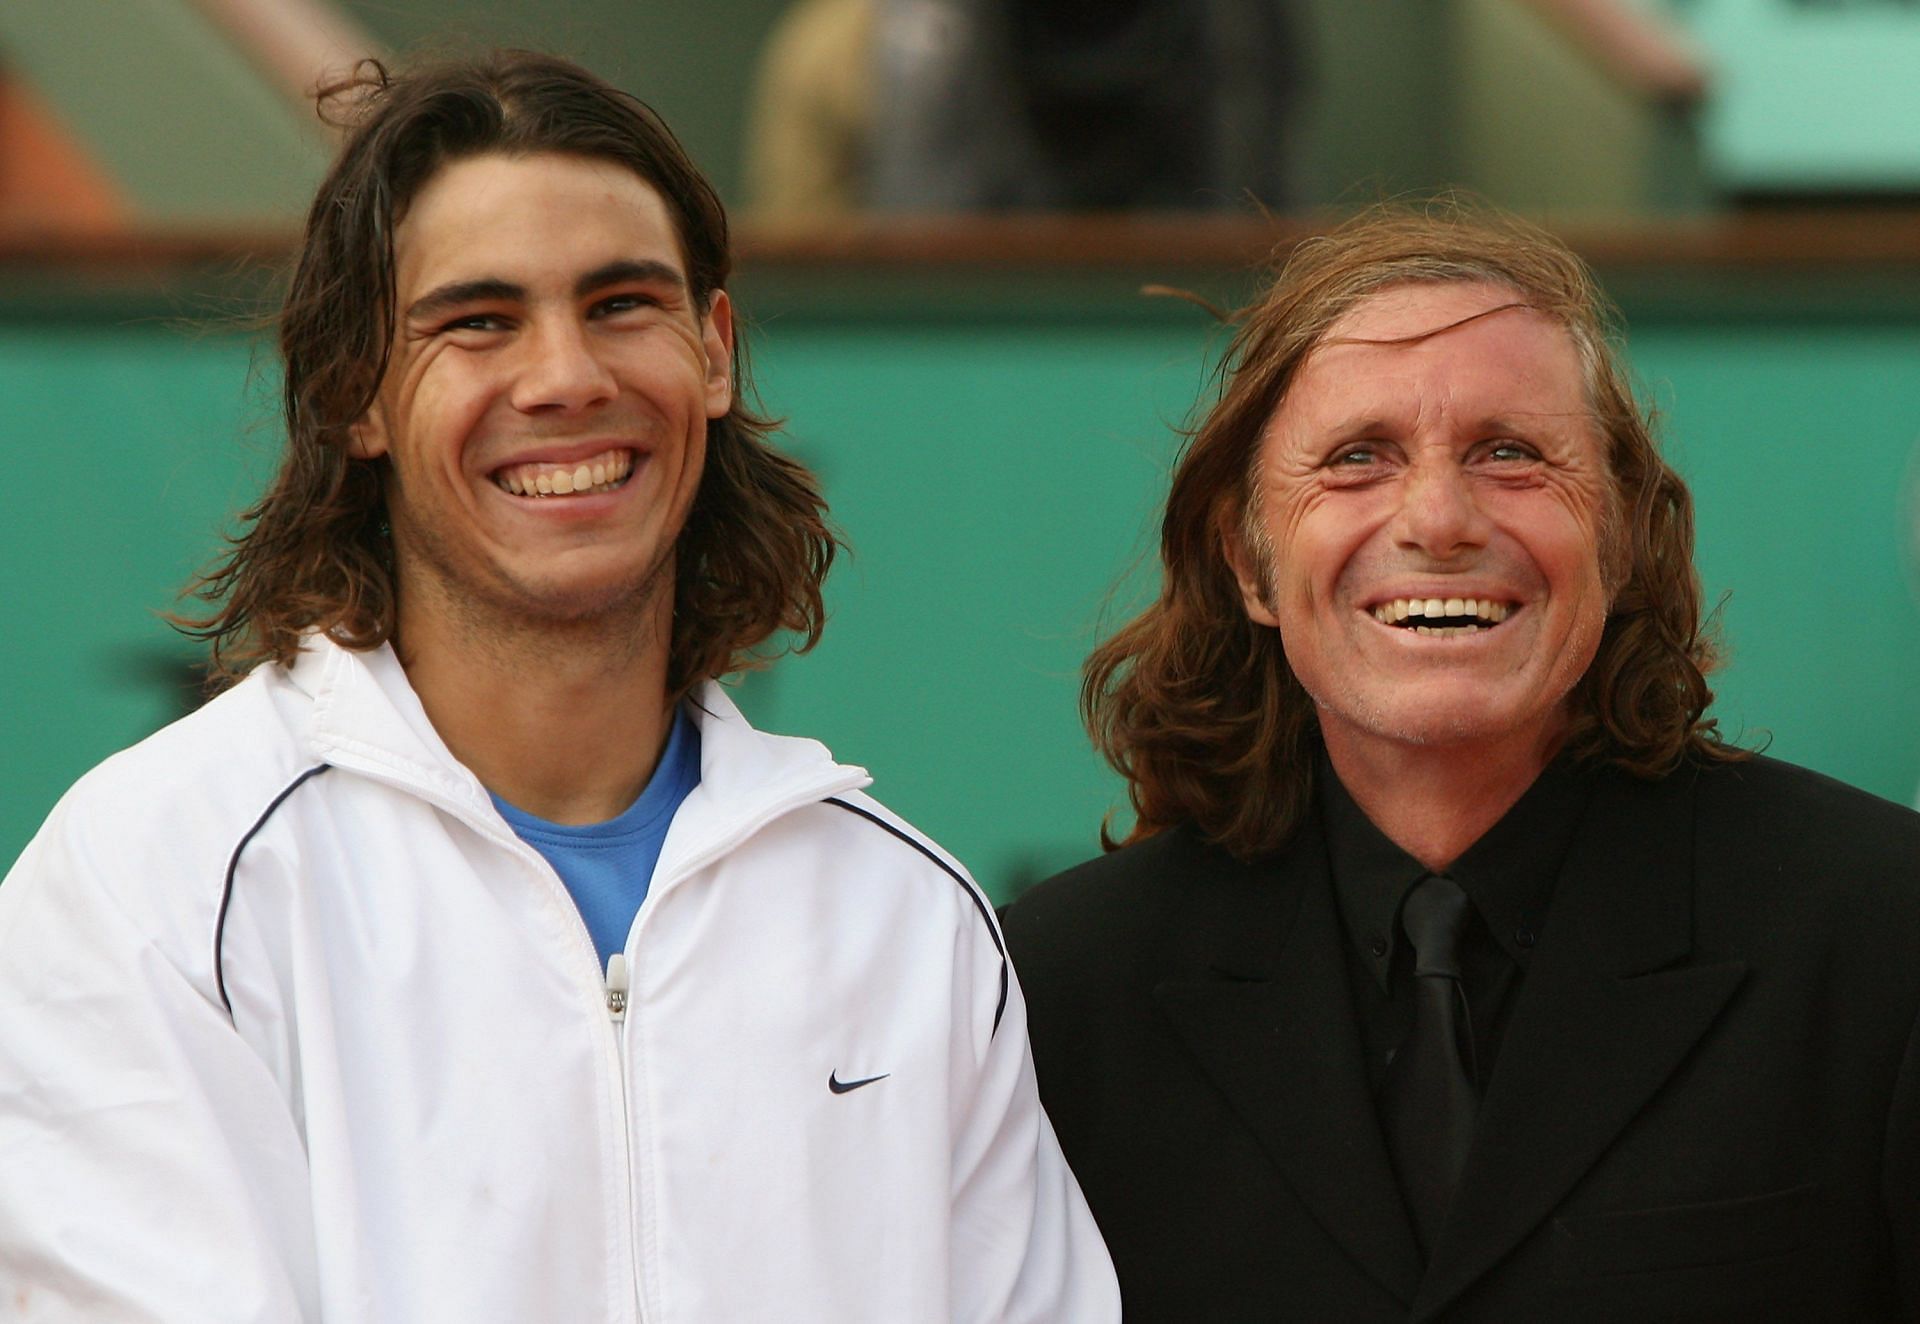 Guillermo Vilas (right) won the French Open in 1977